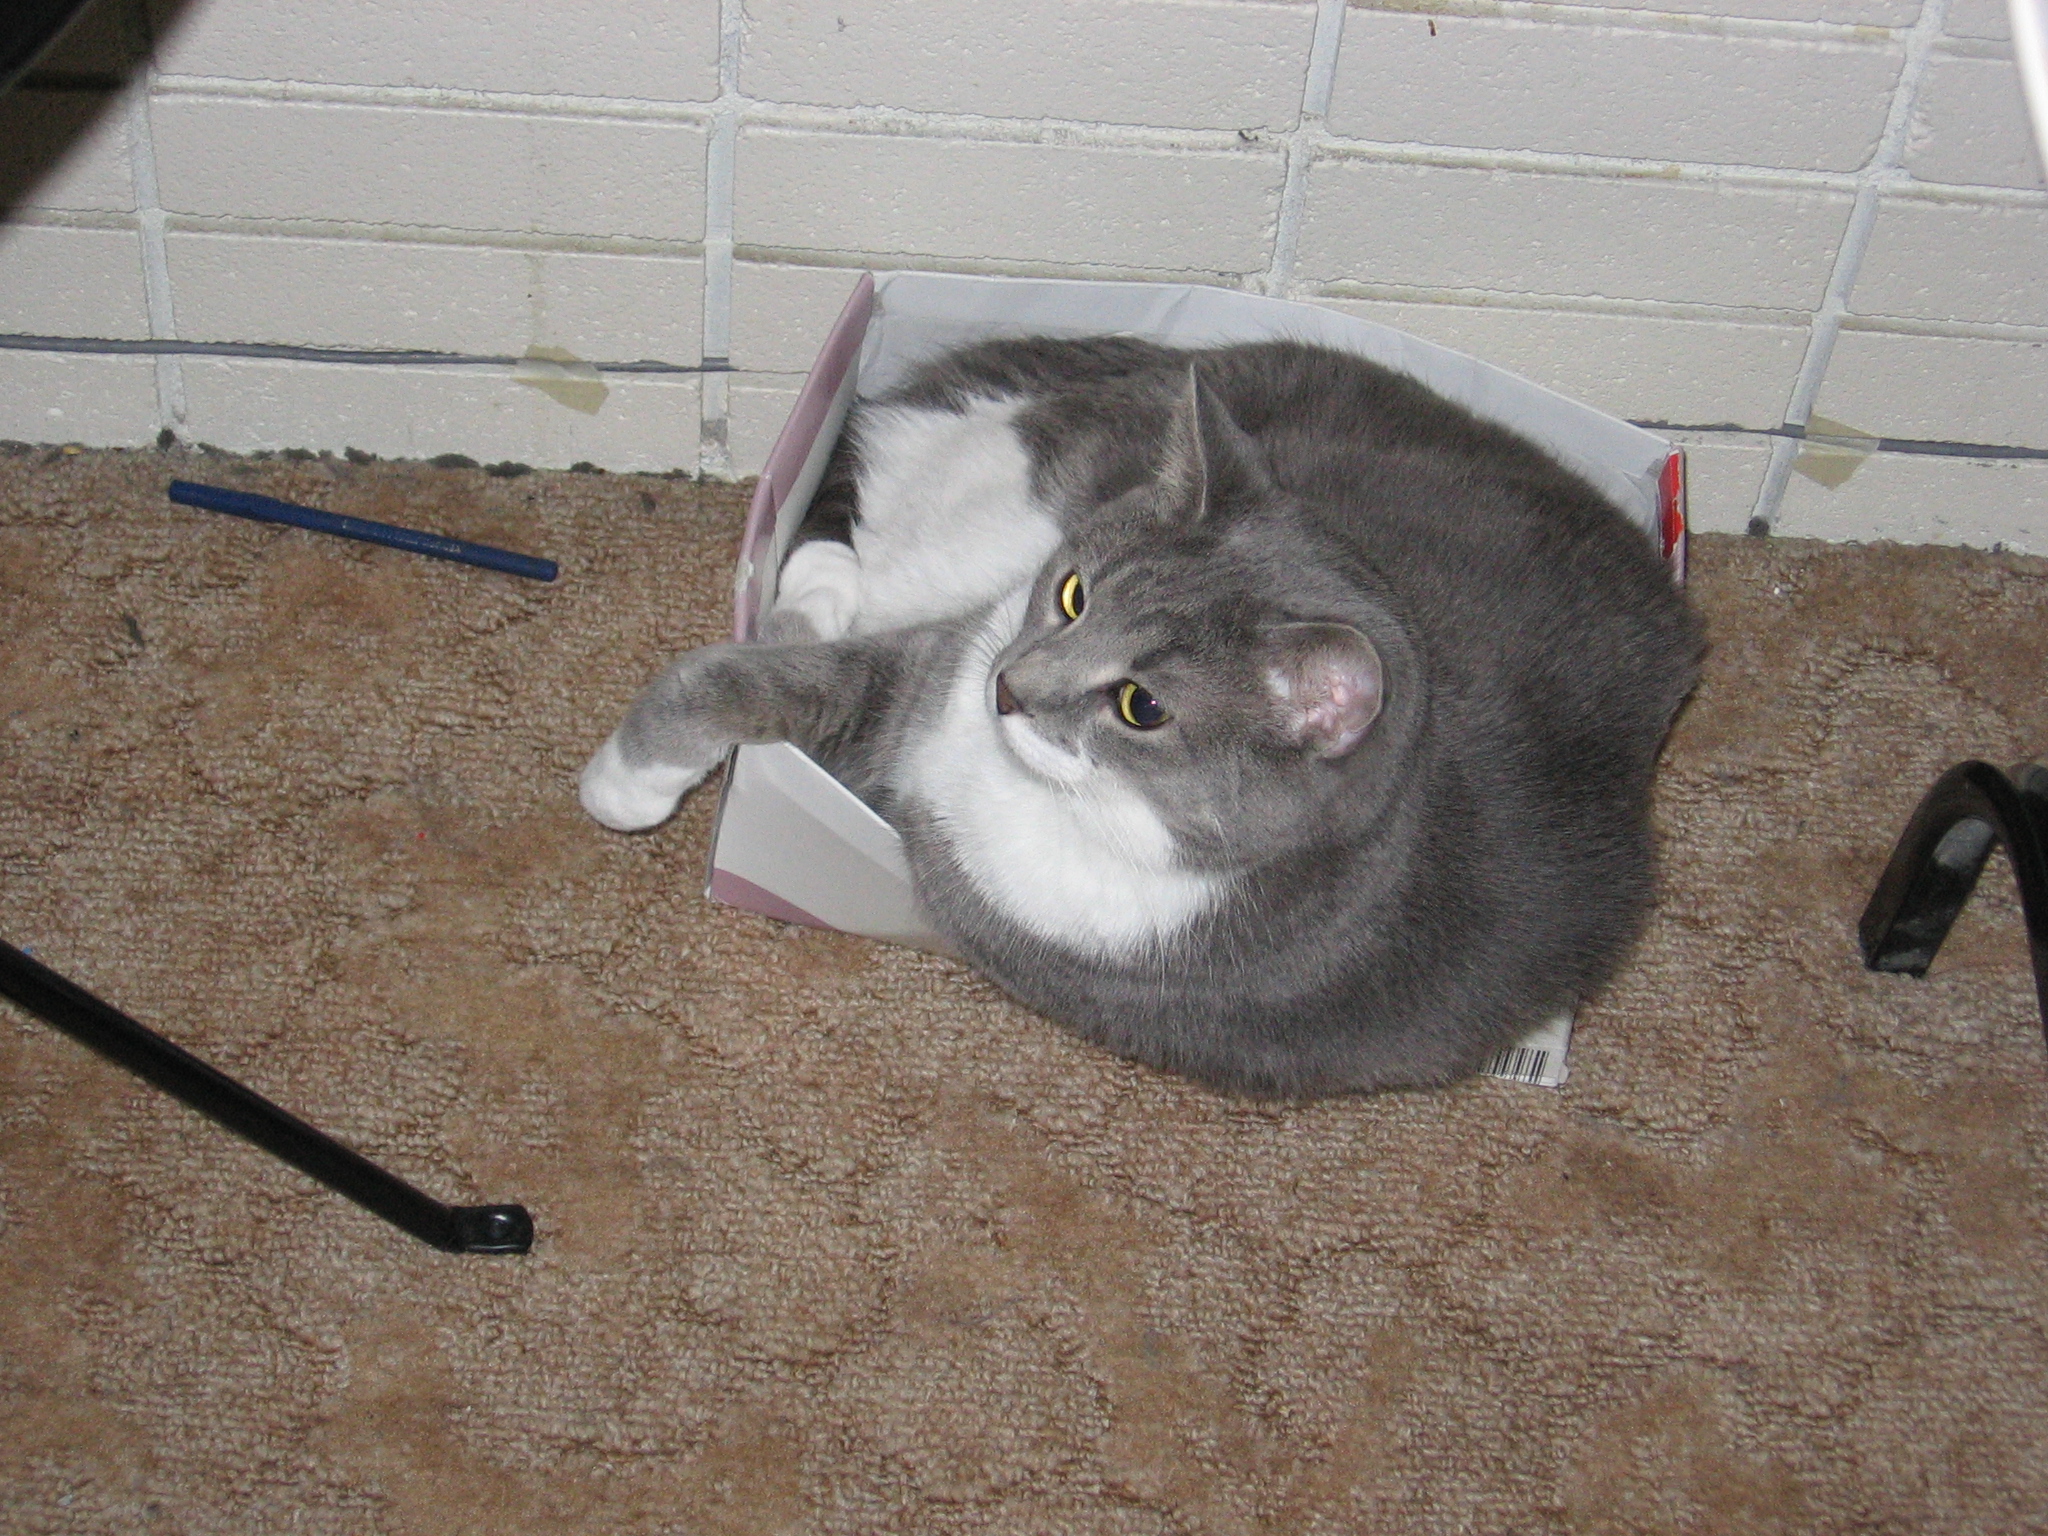 Raistlin trying to curl up in way too small and thin of a box, and it collapsing under and around him, and he has a pleased look on his face.